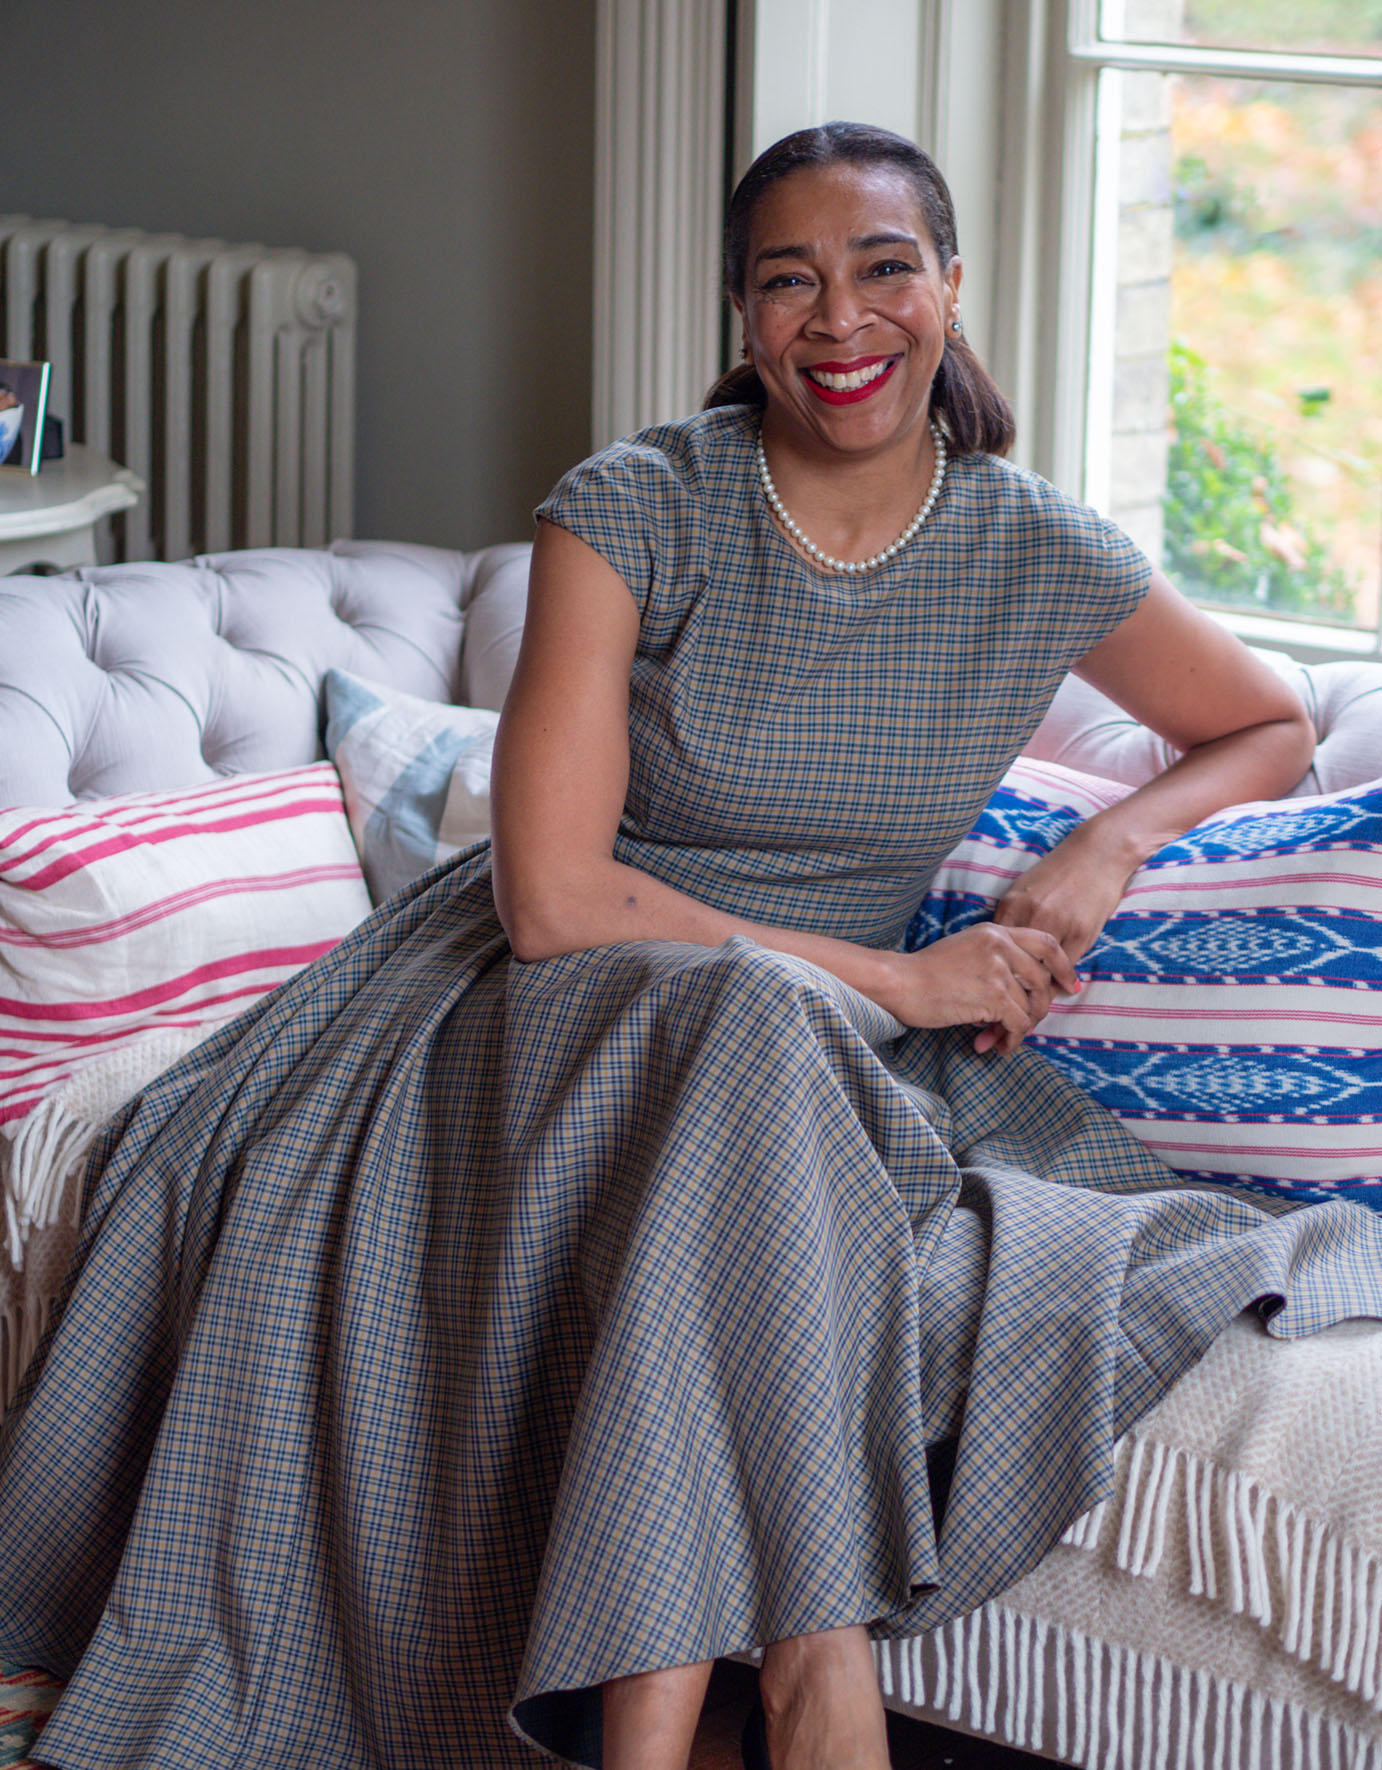 Paula Sutton, creator of Hill House Vintage, poses on a sofa at home, wearing pearls and a 1950s retro-style full-skirted gray dress and pearls